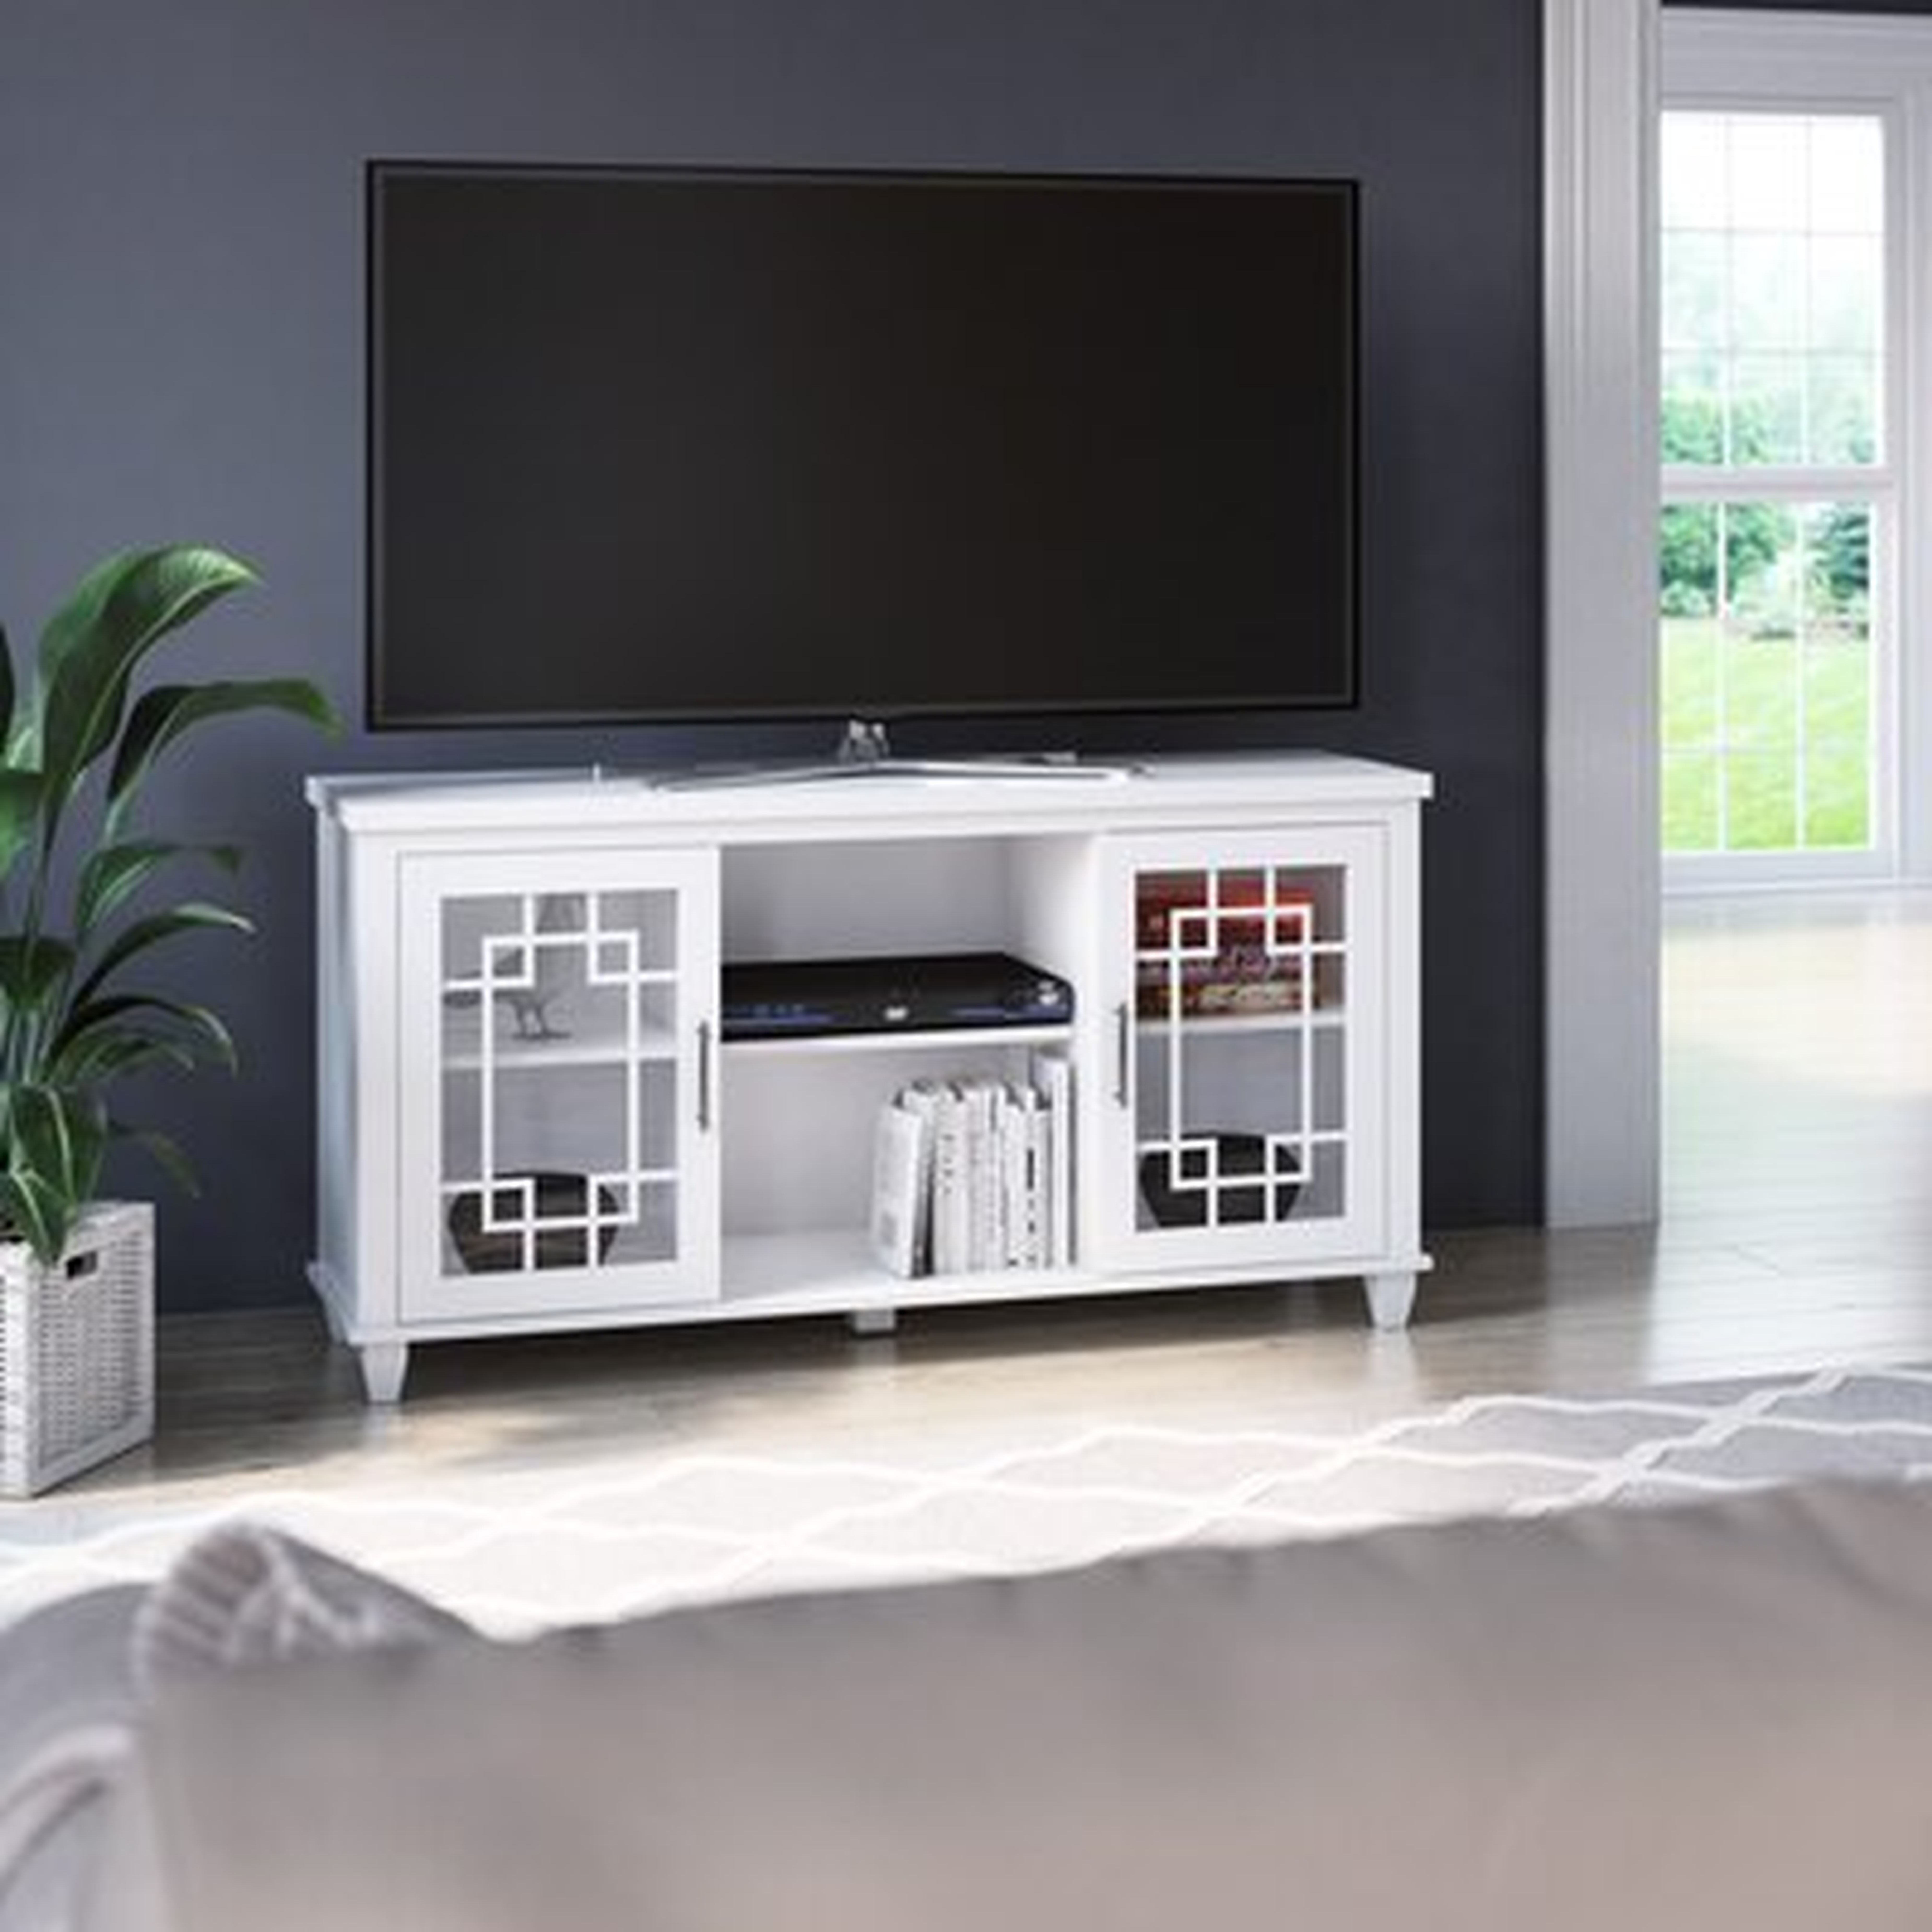 Gorgas TV Stand for TVs up to 60" - Wayfair